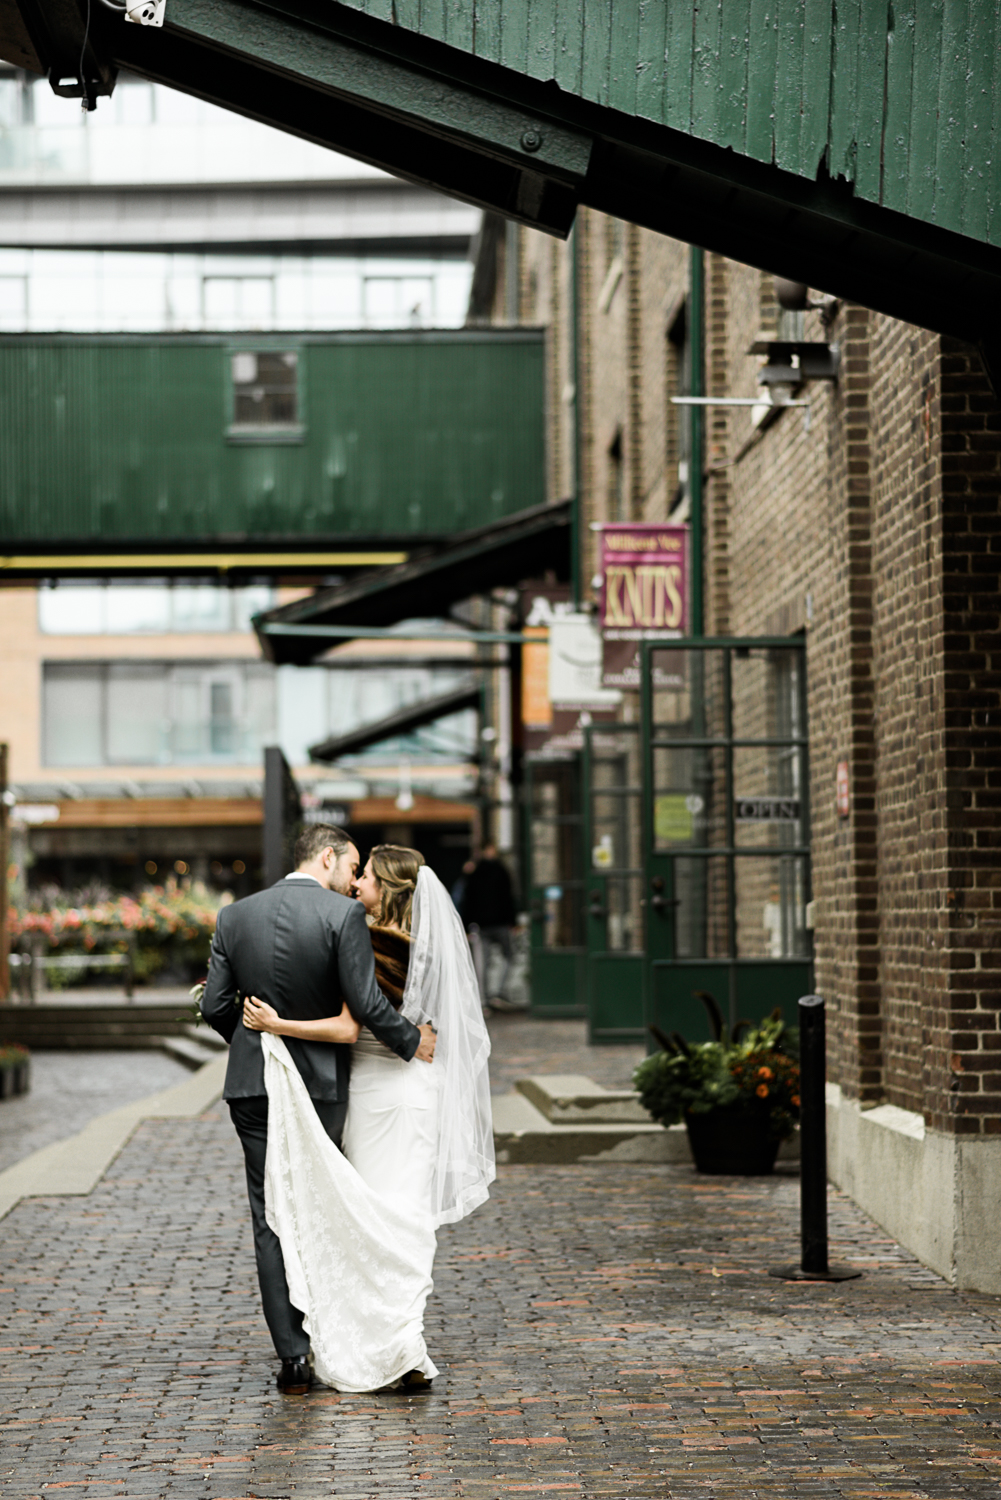 Bride and groom embrace at the distillery district for their wedding photos